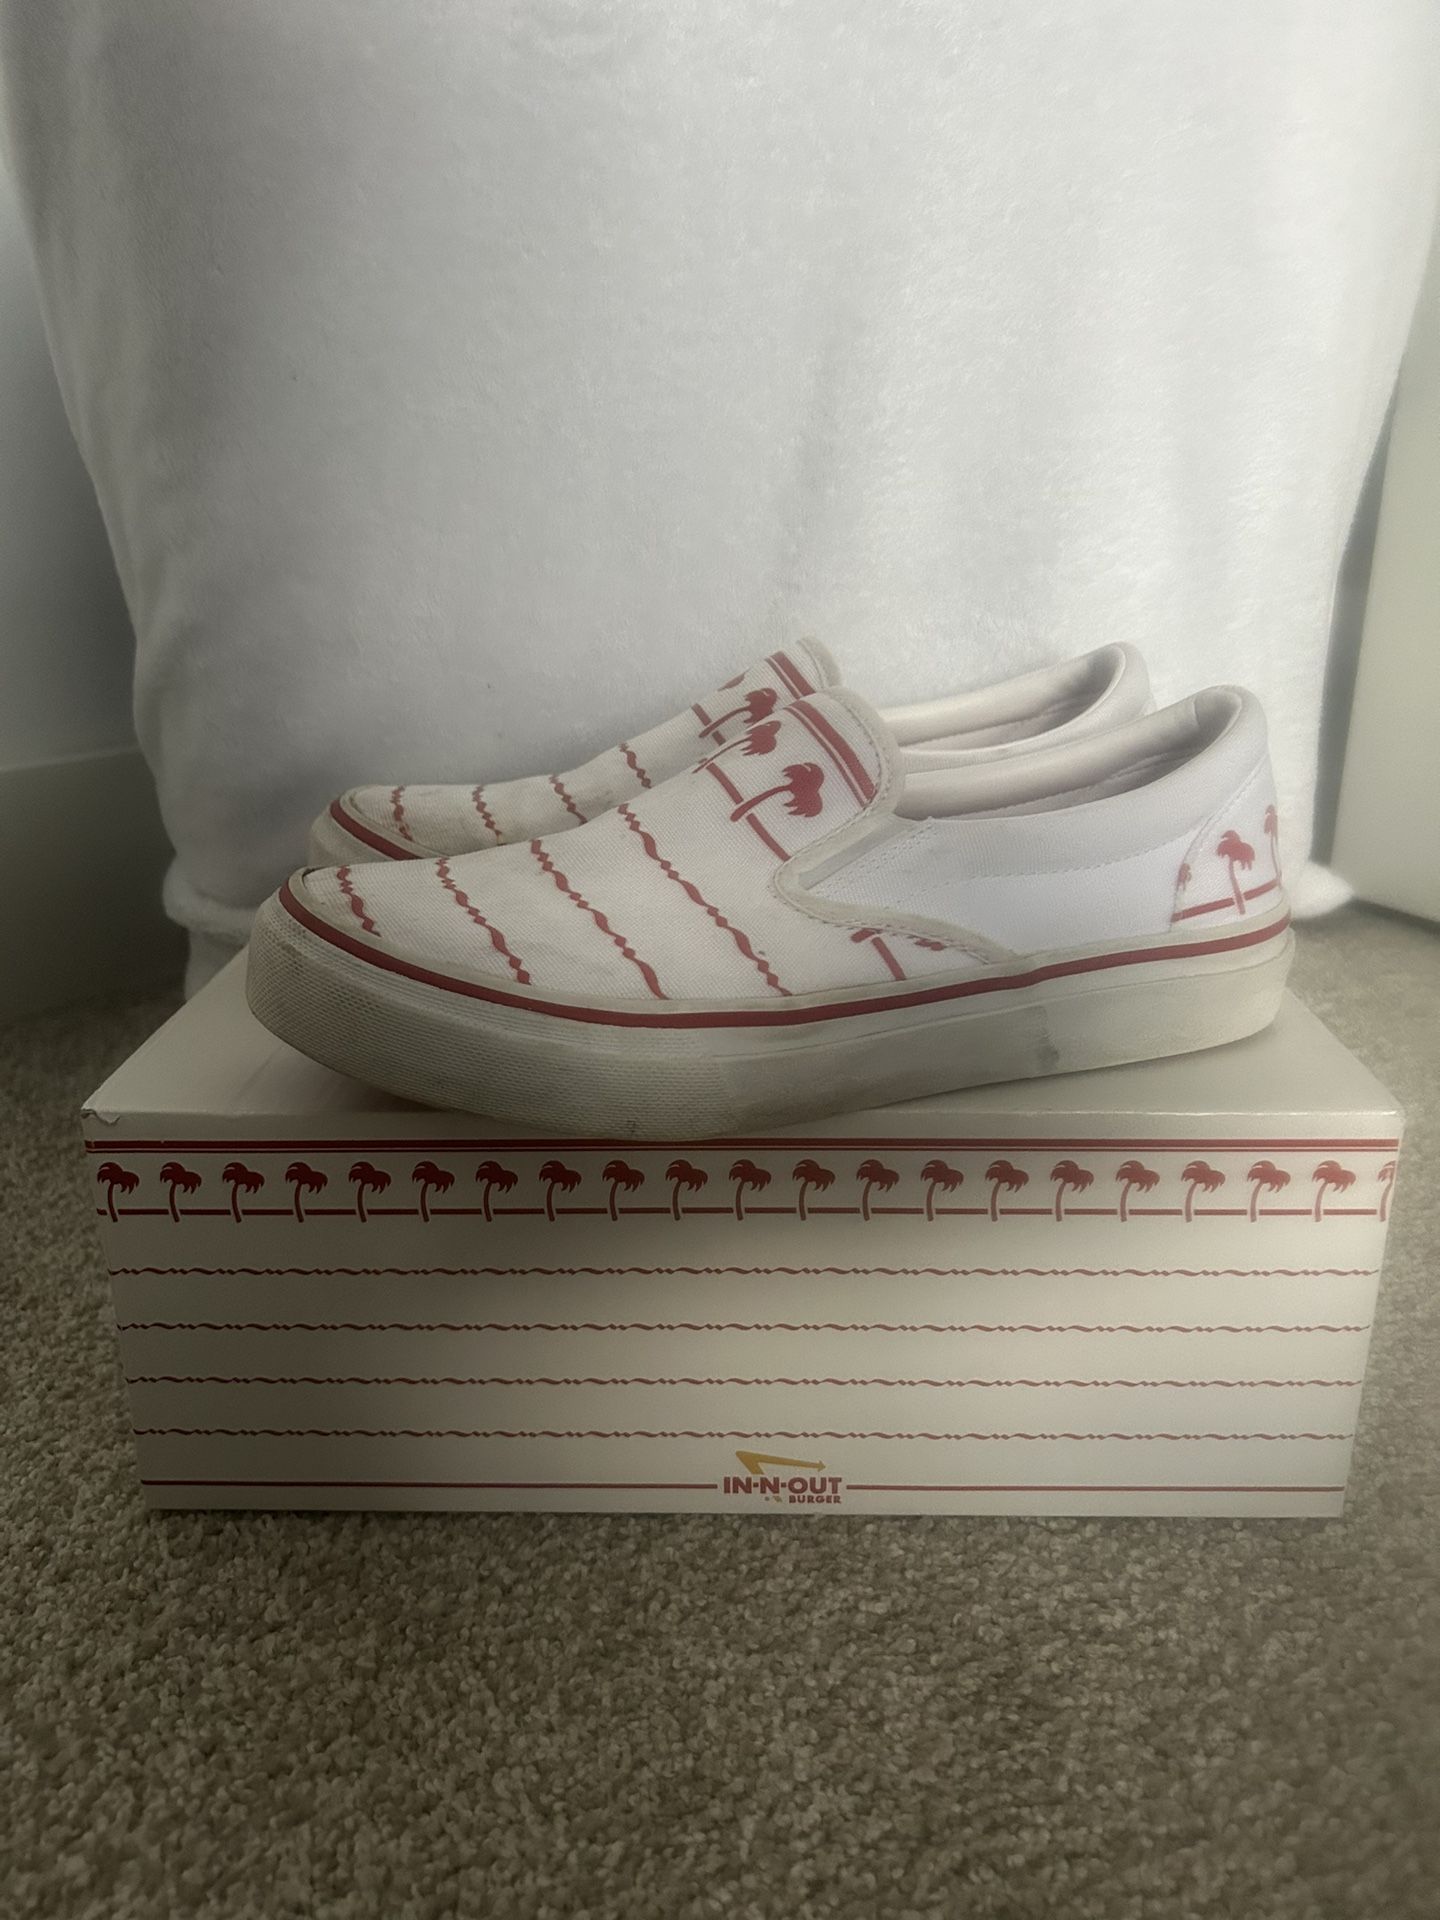  White Vans In and Out Slip-On Shoes Size 9 (Used)